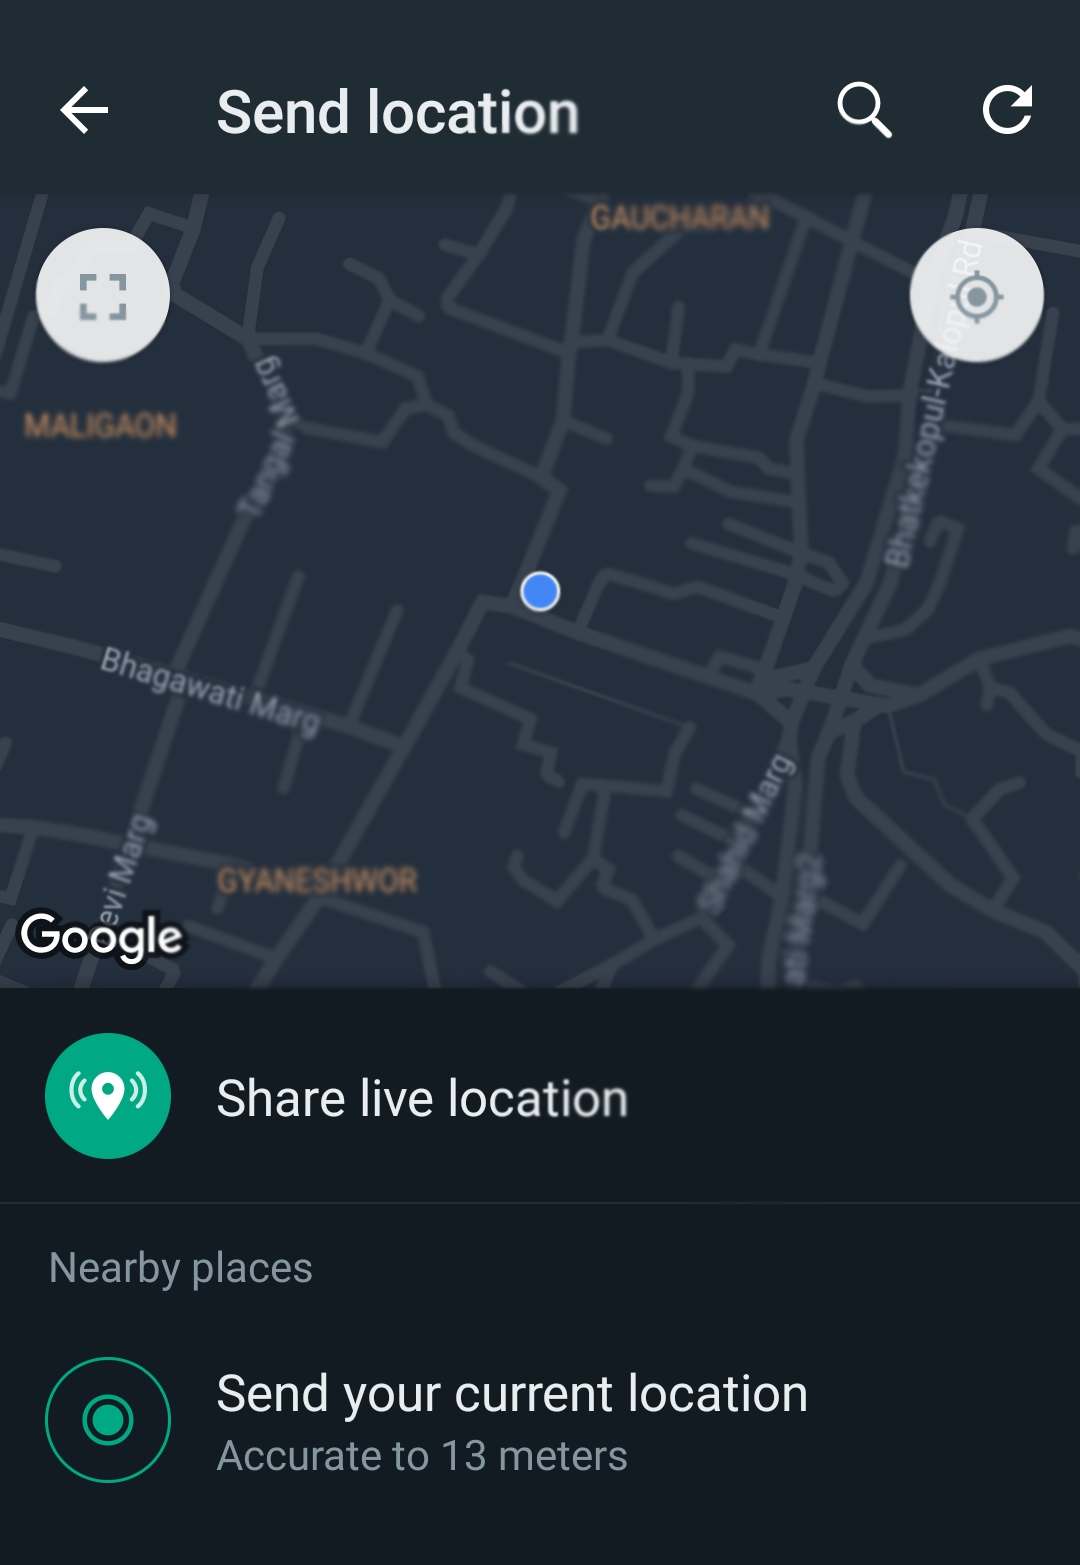 chose the option to share location with others on WhatsApp.